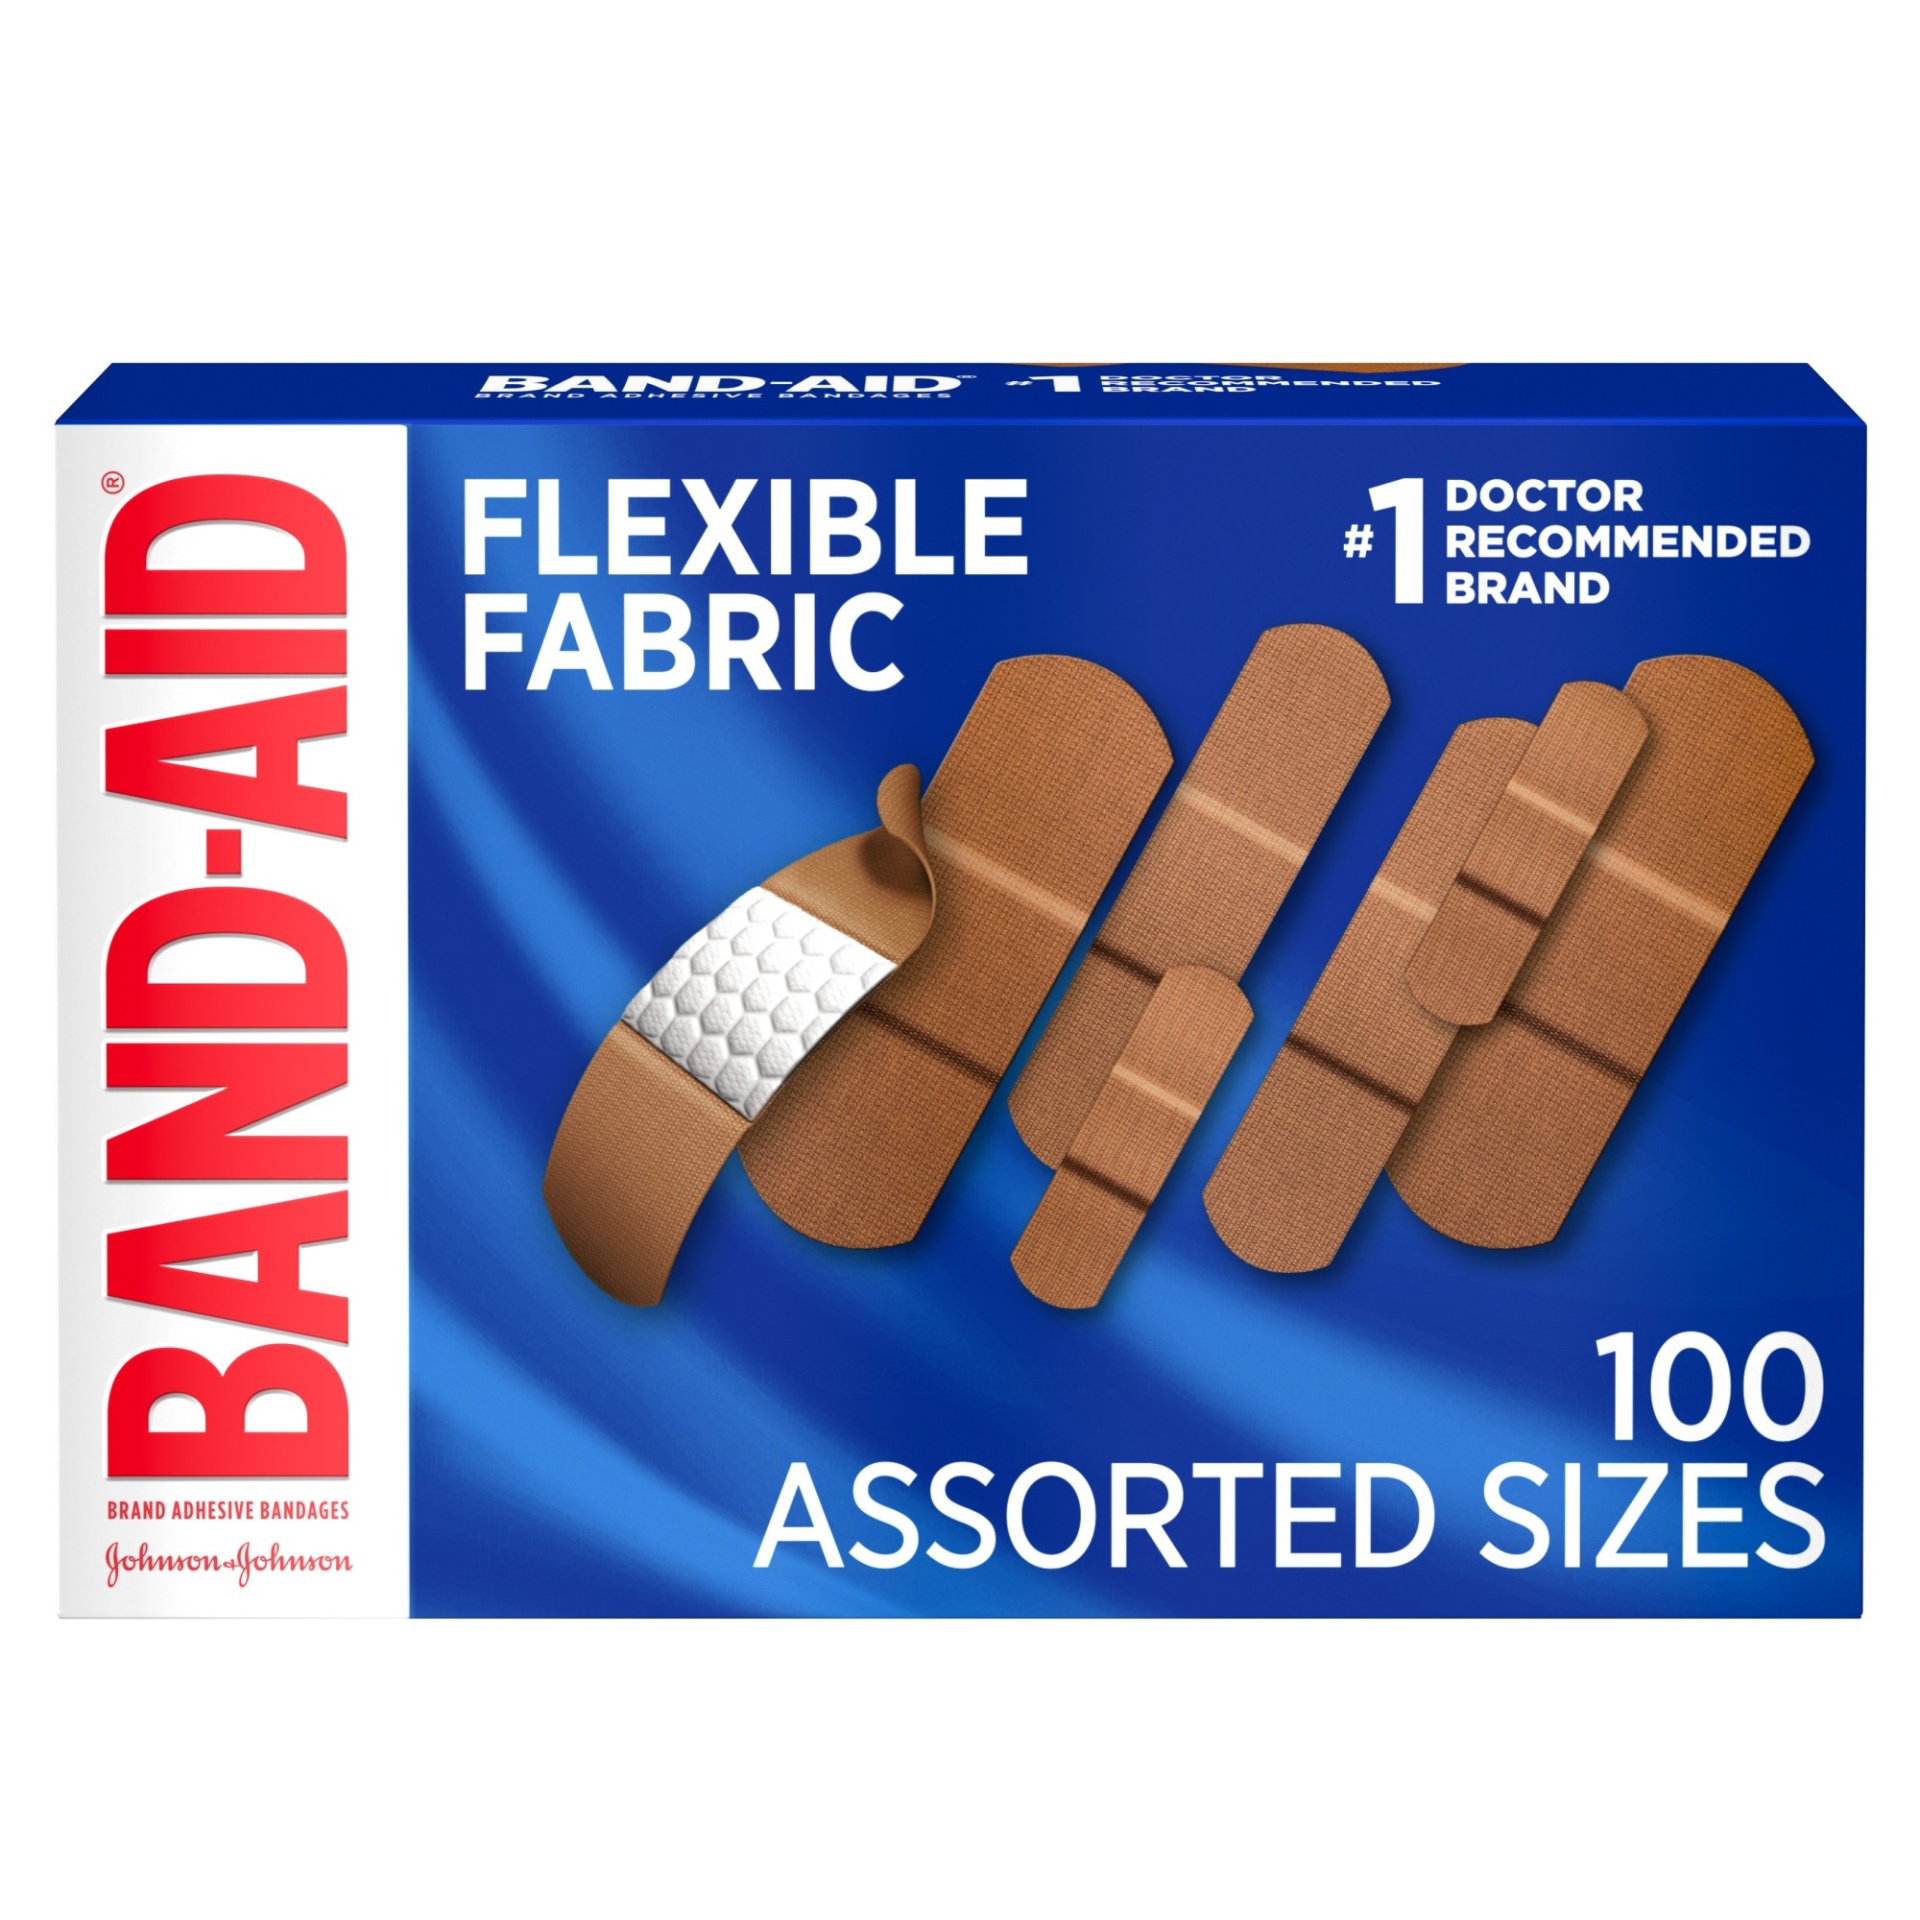 slide 1 of 8, BAND-AID Flexible Fabric Adhesive Bandages, Comfortable Sterile Protection & Wound Care for Minor Cuts & Burns, Quilt-Aid Technology to Cushion Painful Wounds, Assorted Sizes, 100 ct